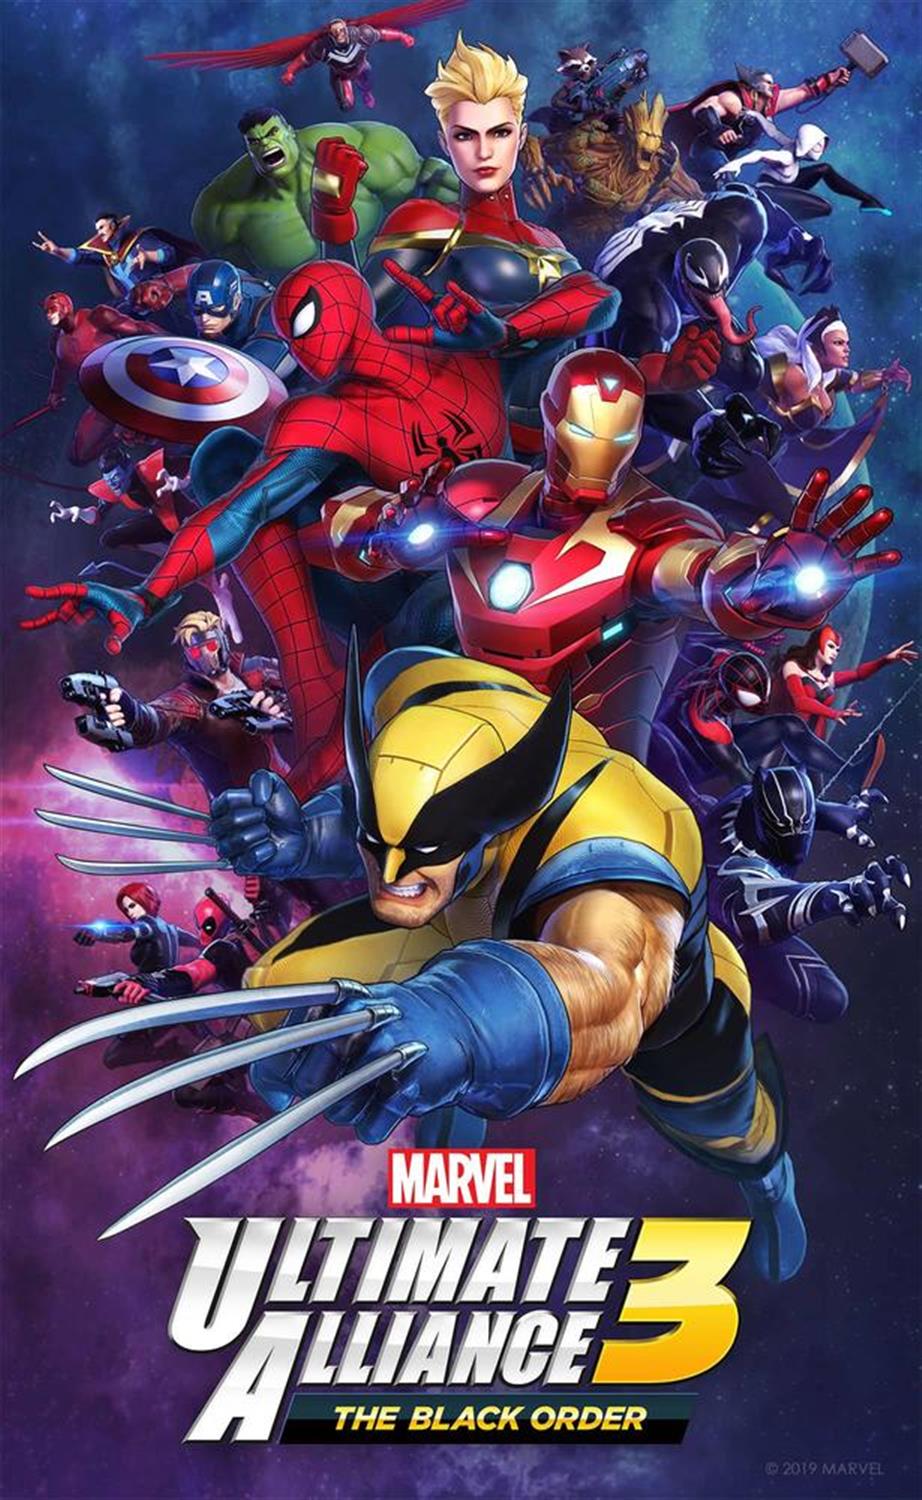 Marvel Ultimate Alliance 3 The Black Order Previews Coming